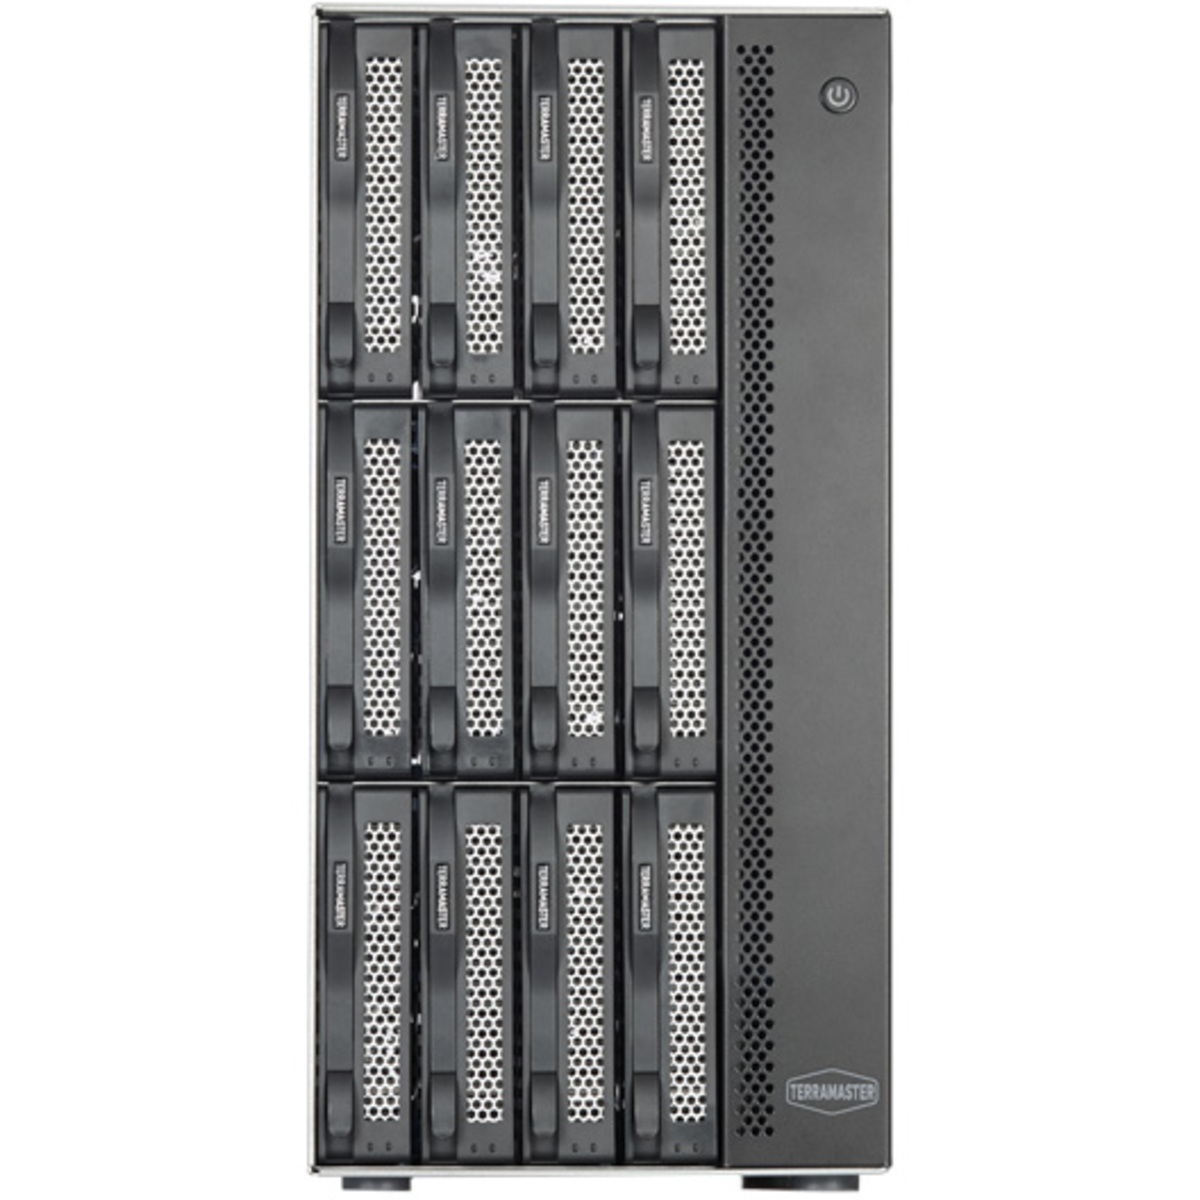 TerraMaster T12-450 220tb 12-Bay Desktop Multimedia / Power User / Business NAS - Network Attached Storage Device 11x20tb Western Digital Ultrastar HC560 WUH722020ALE6L4 3.5 7200rpm SATA 6Gb/s HDD ENTERPRISE Class Drives Installed - Burn-In Tested T12-450